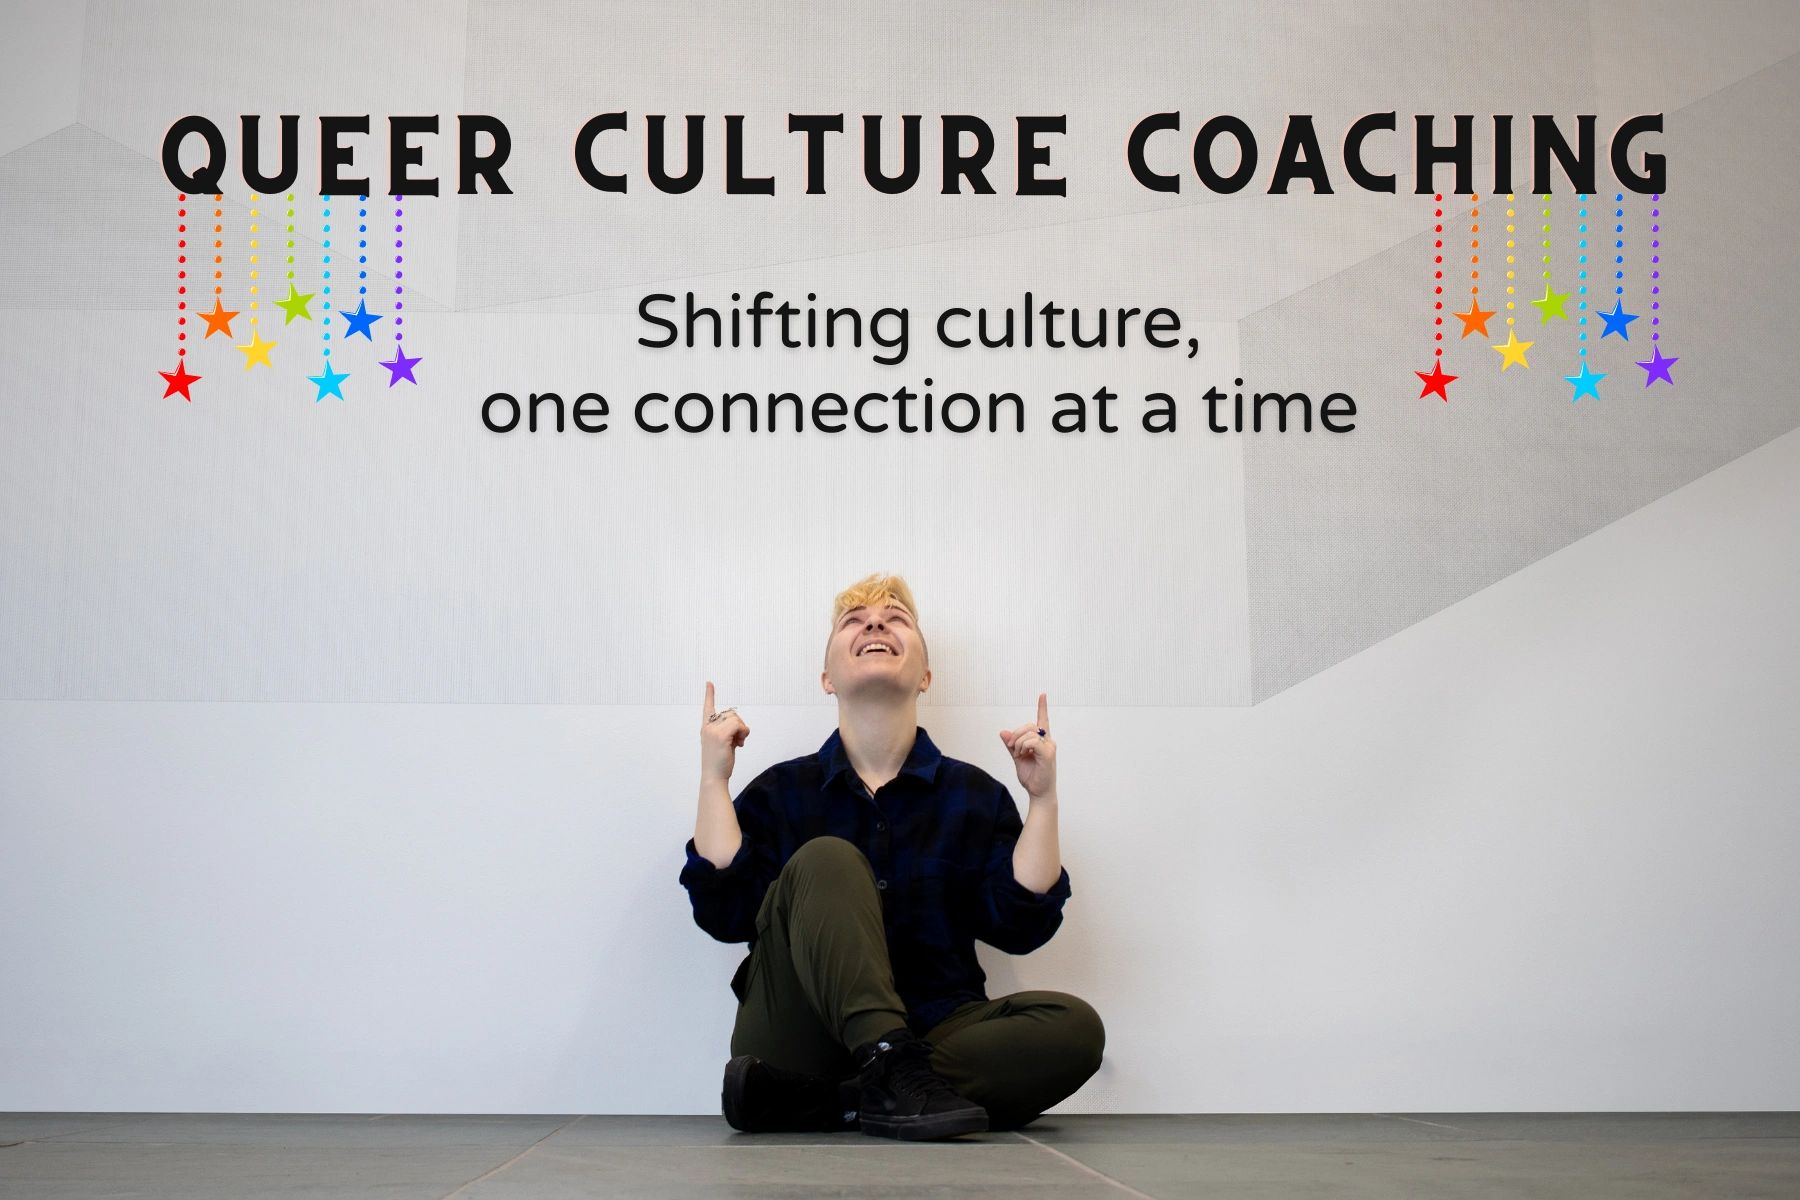 Image says: Queer Culture Coaching, Shifting culture one connection at a time. 